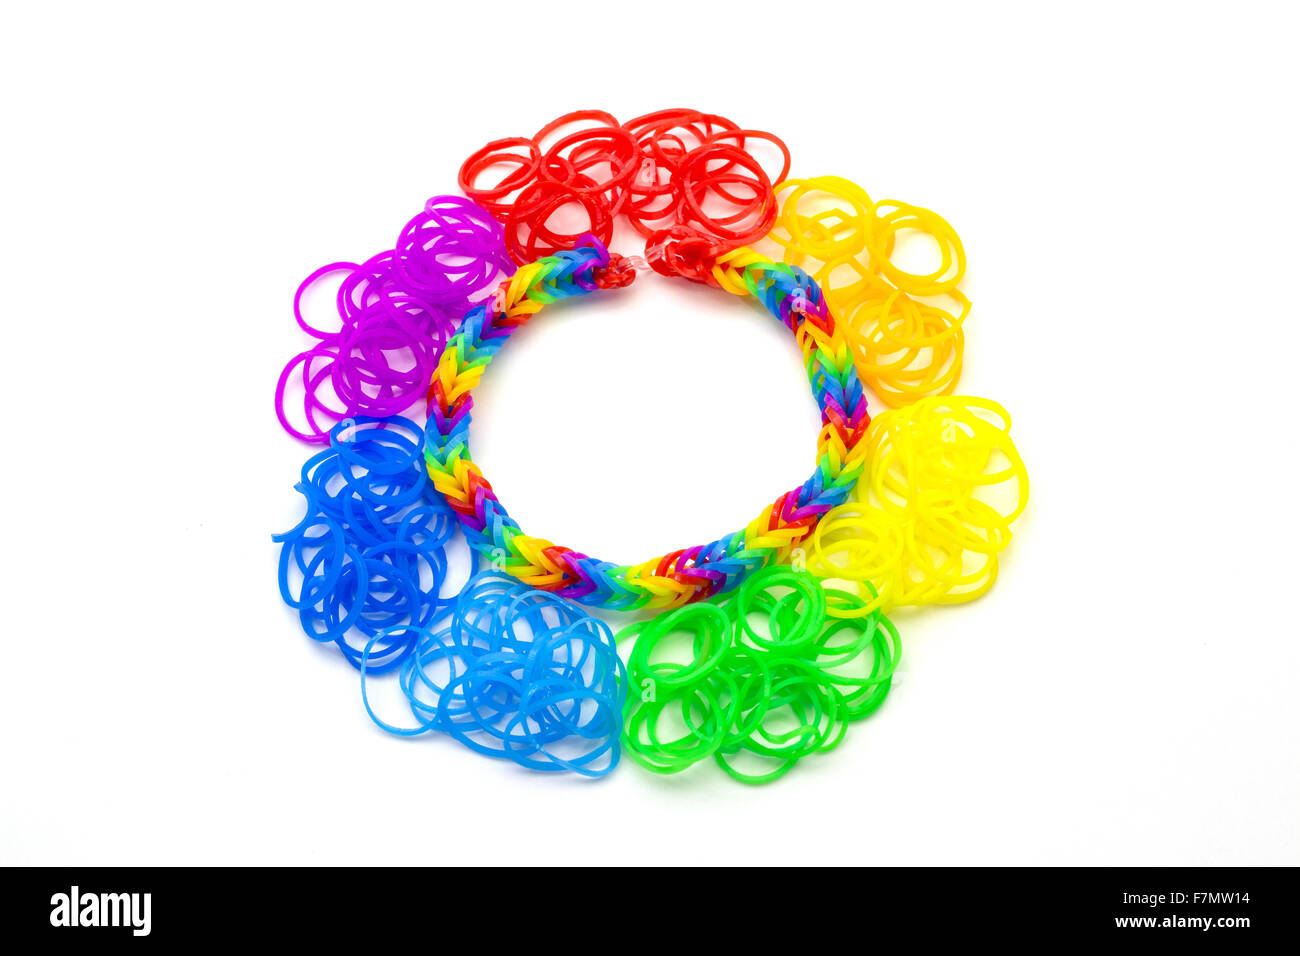 Young girl showing off rainbow loom band bracelets on her wrist Stock Photo  - Alamy